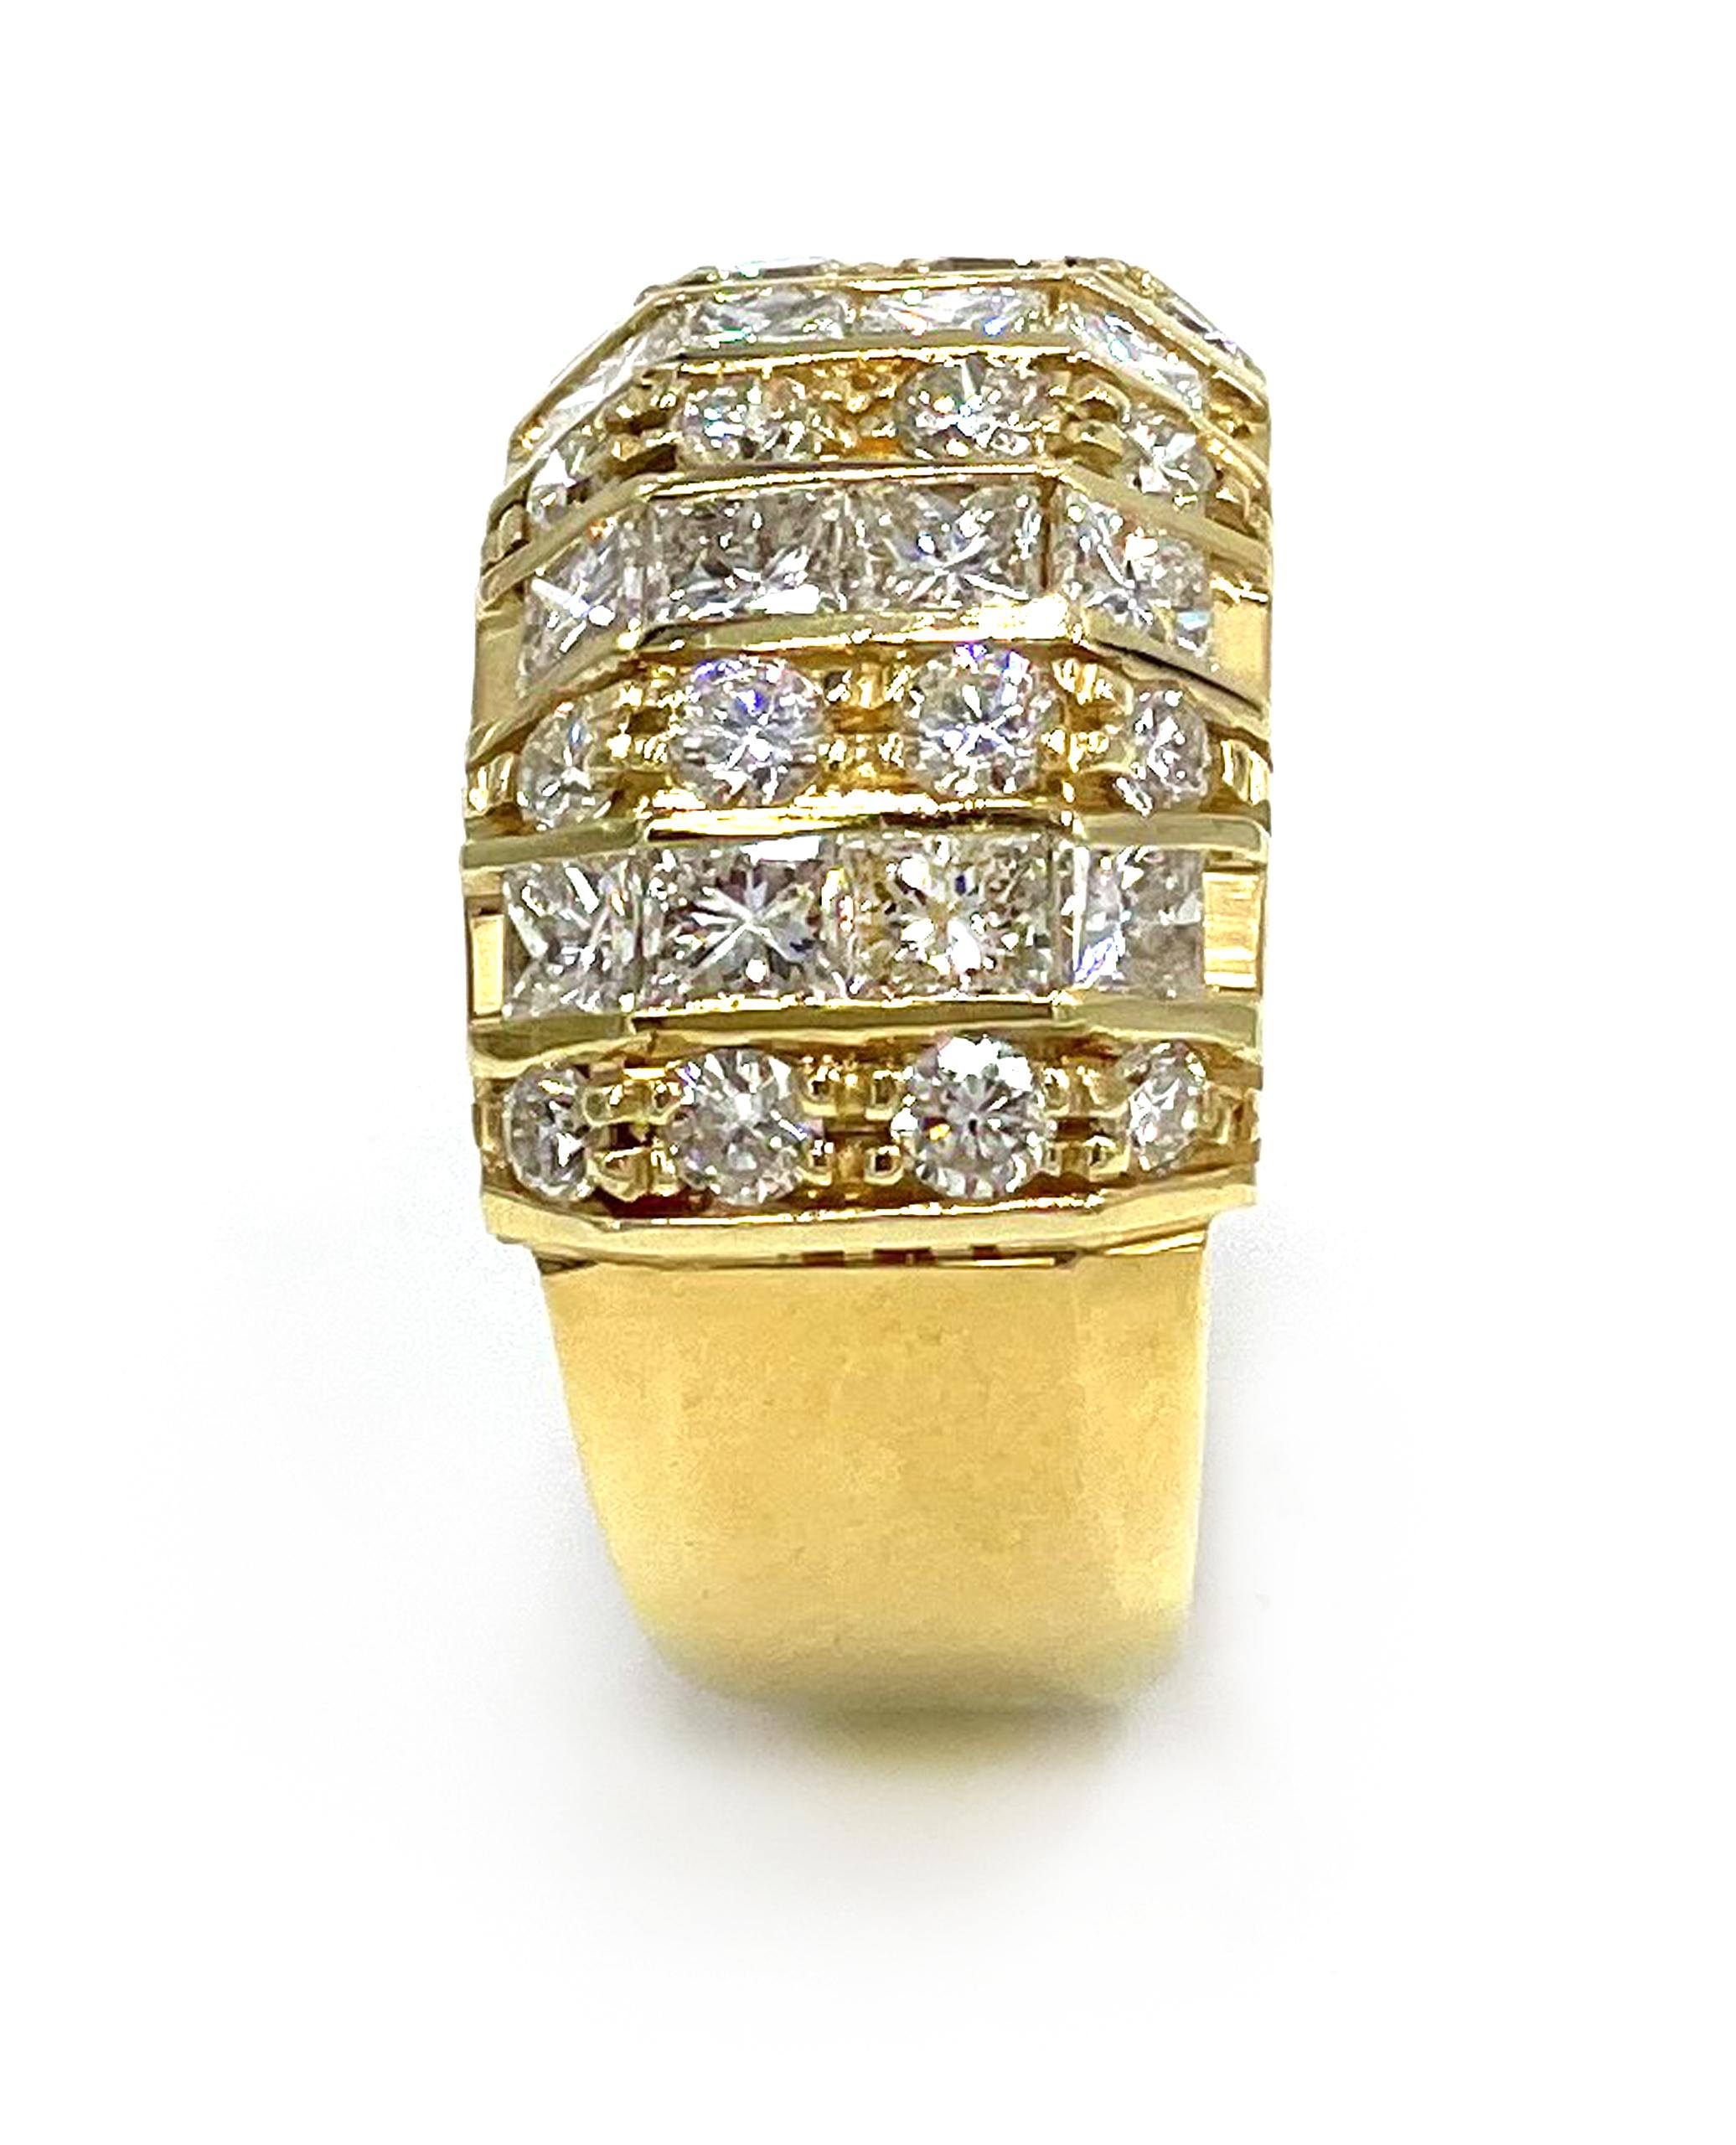 Vintage 18K yellow gold ring with 12 princess cut diamonds and 16 round diamonds, all totaling 2.05 carats: G color, VS Clarity. (Created circa 1985)

-Finger size: 6.5